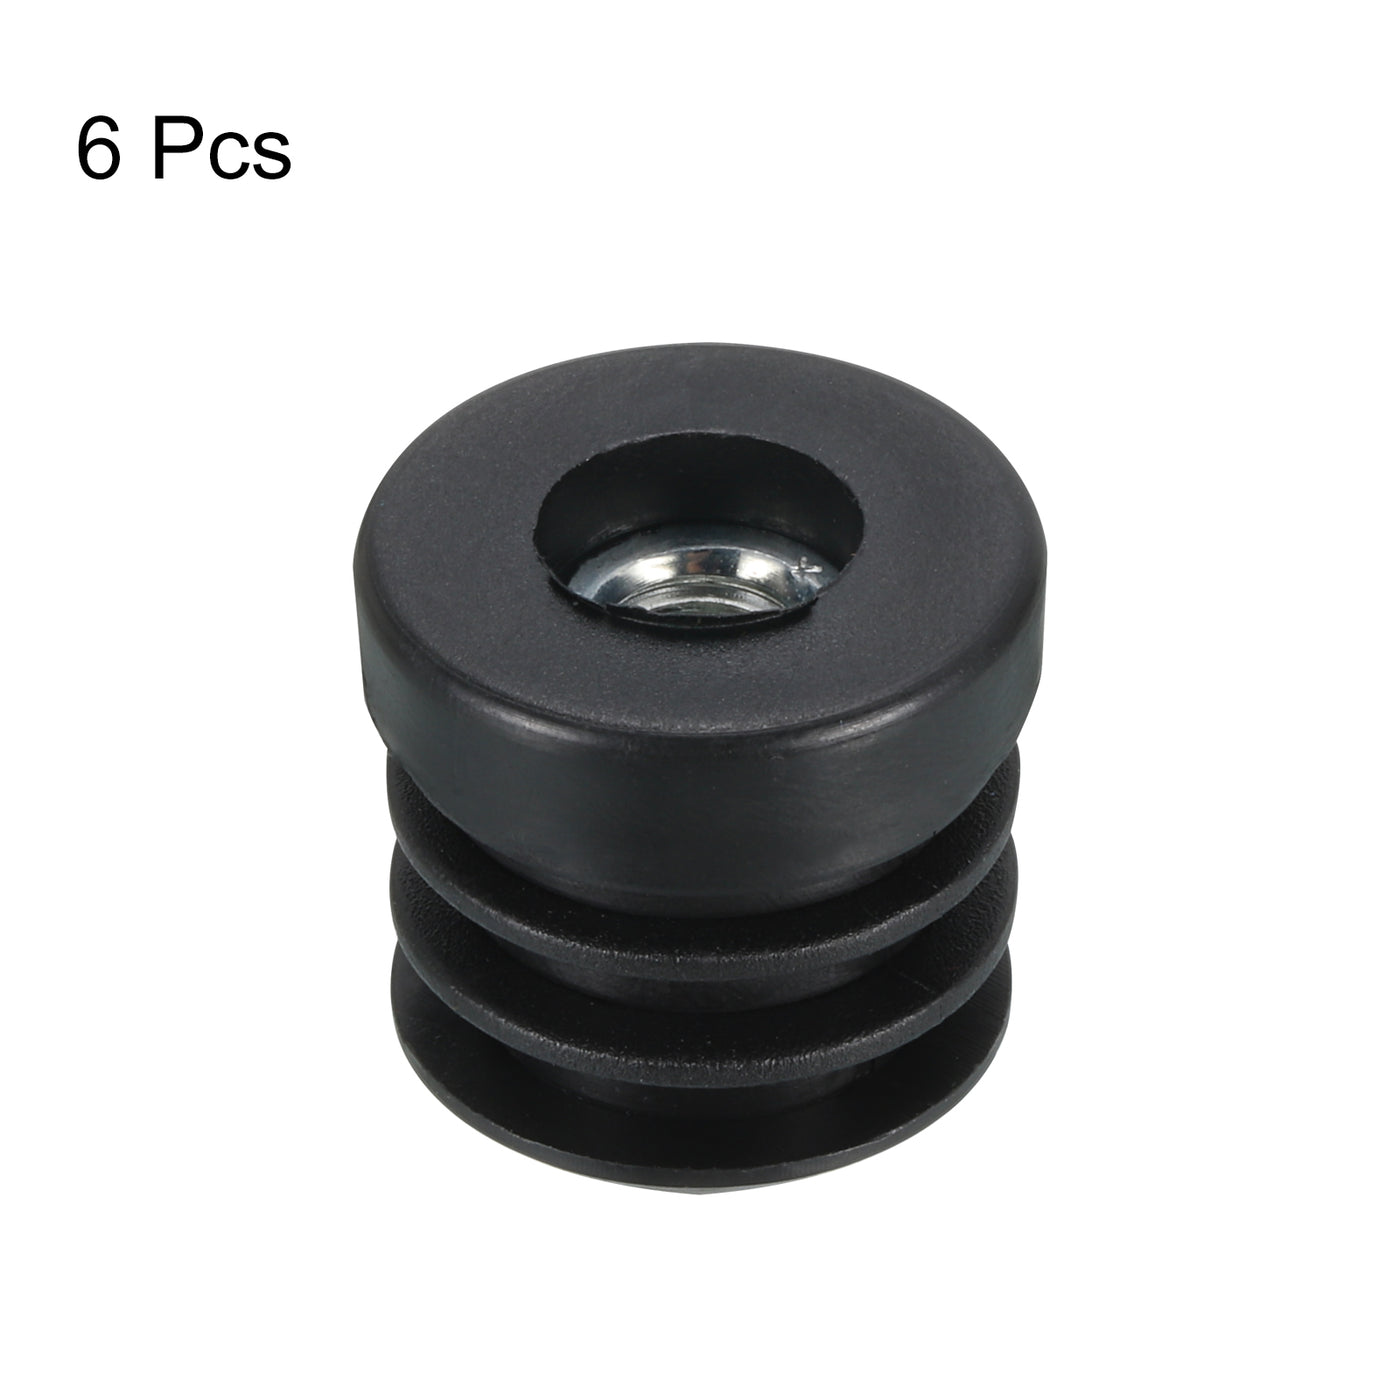 uxcell Uxcell 6Pcs Caster Insert with Thread, 25mm/0.98" M8 Thread for Furniture